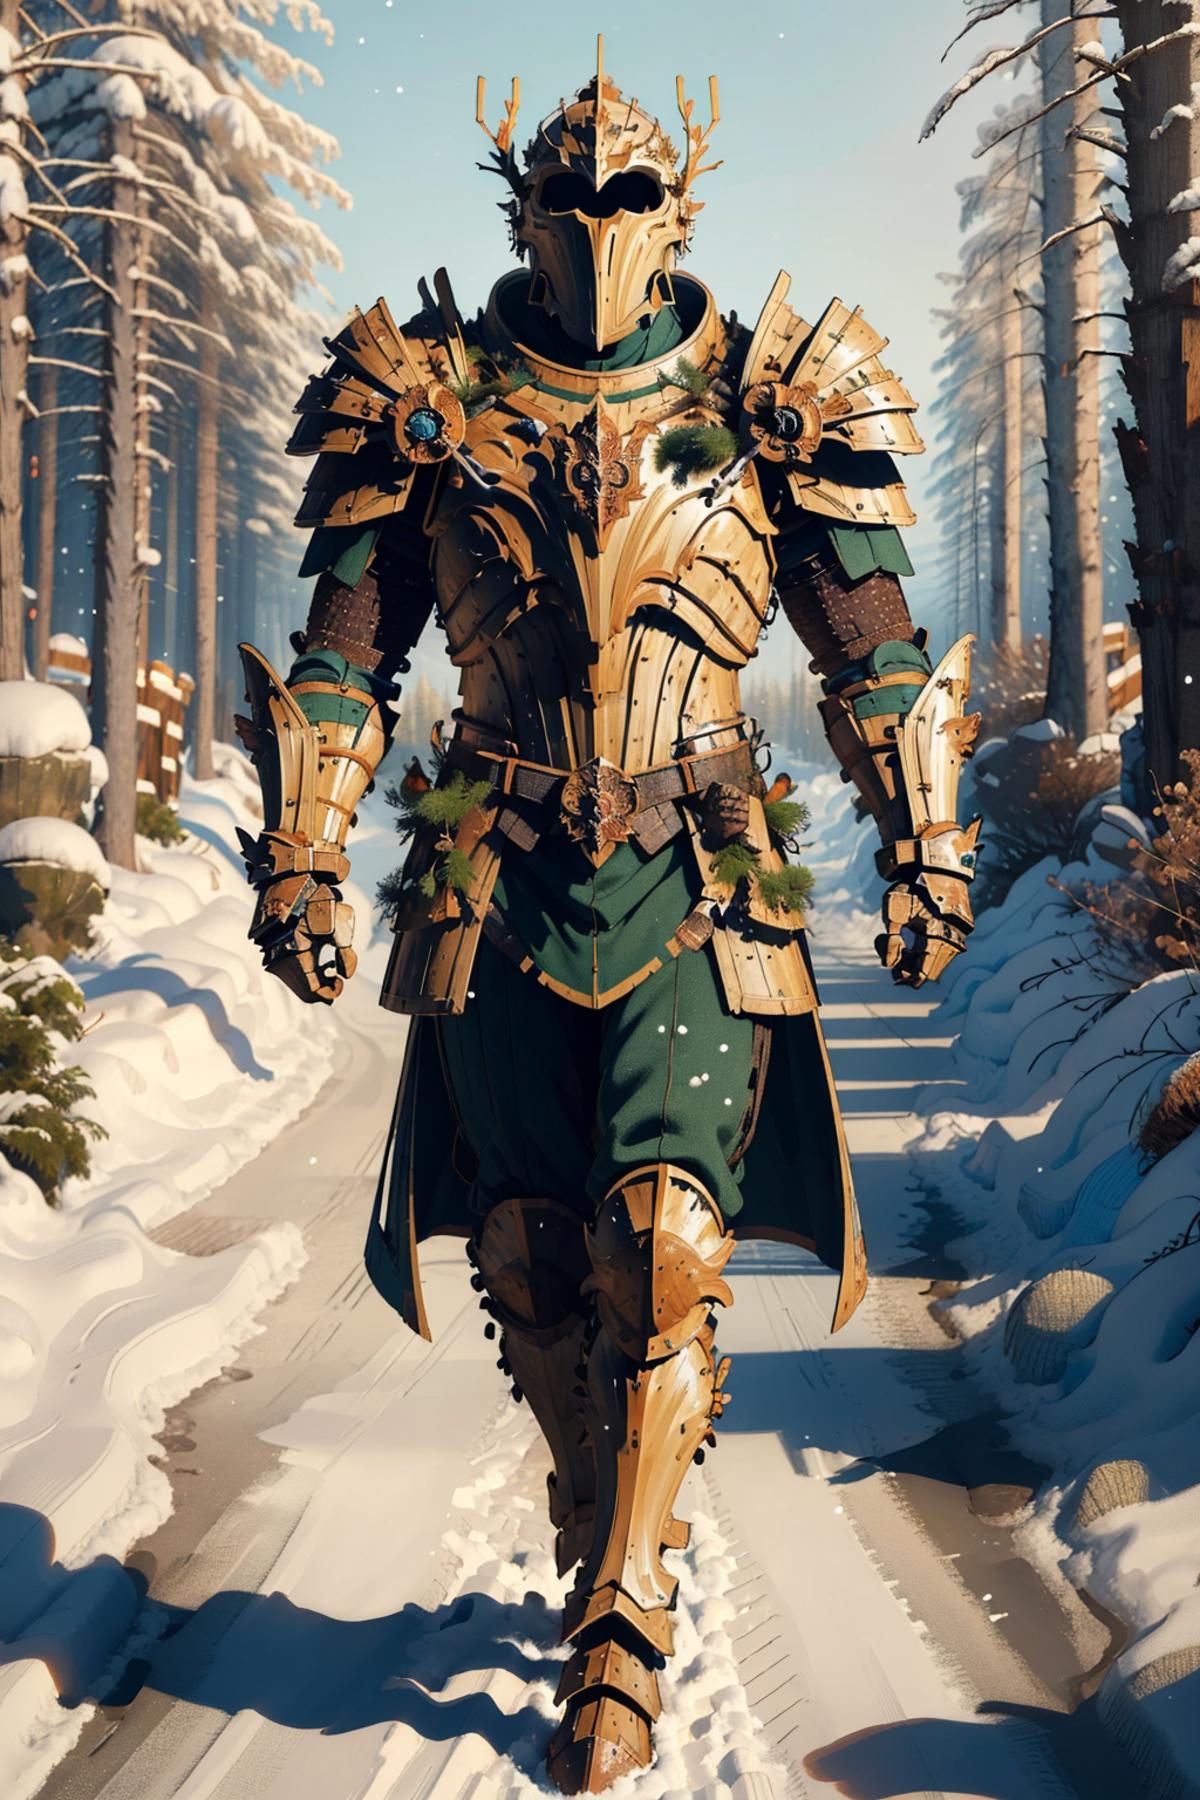 A man in a green and gold costume walking down a snowy path.